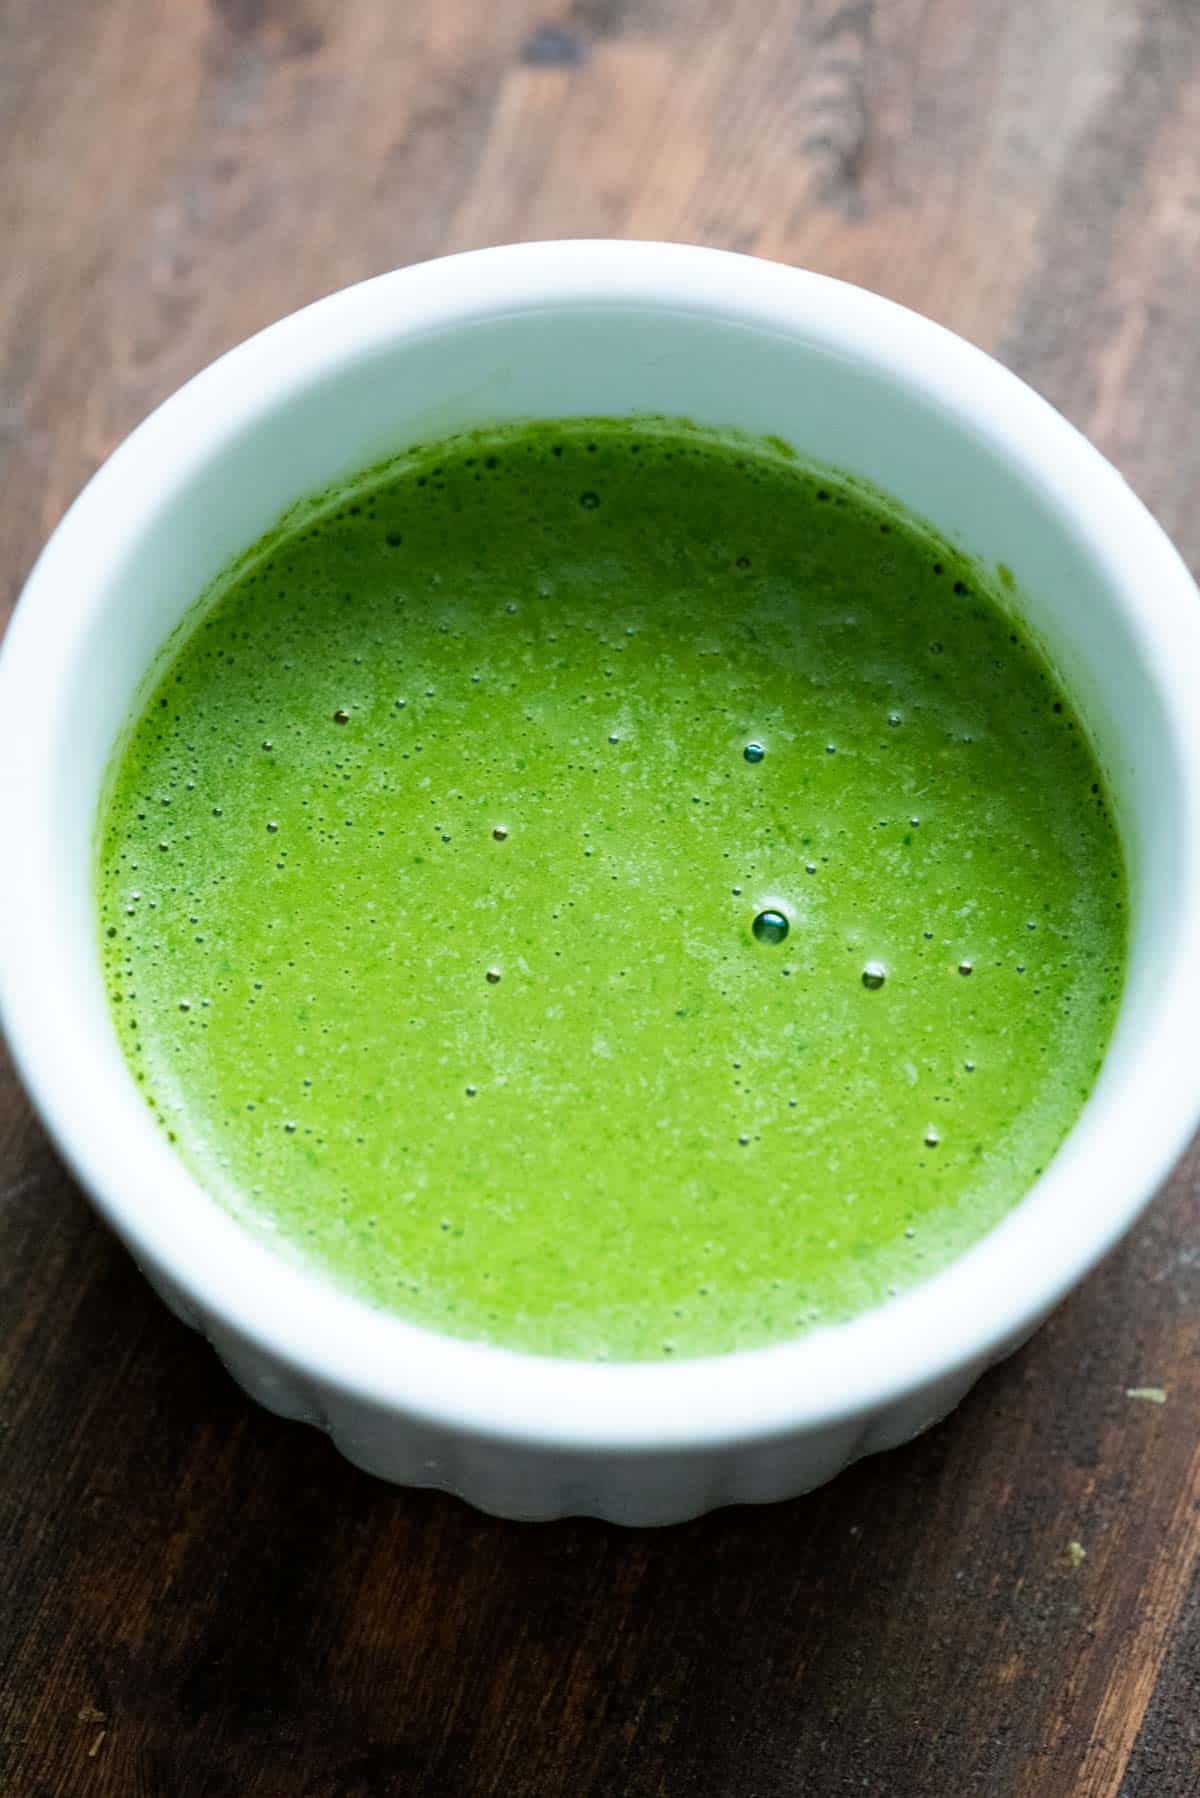 Thick green chutney with cashews blended in, ina white ramekin on a wooden backdrop